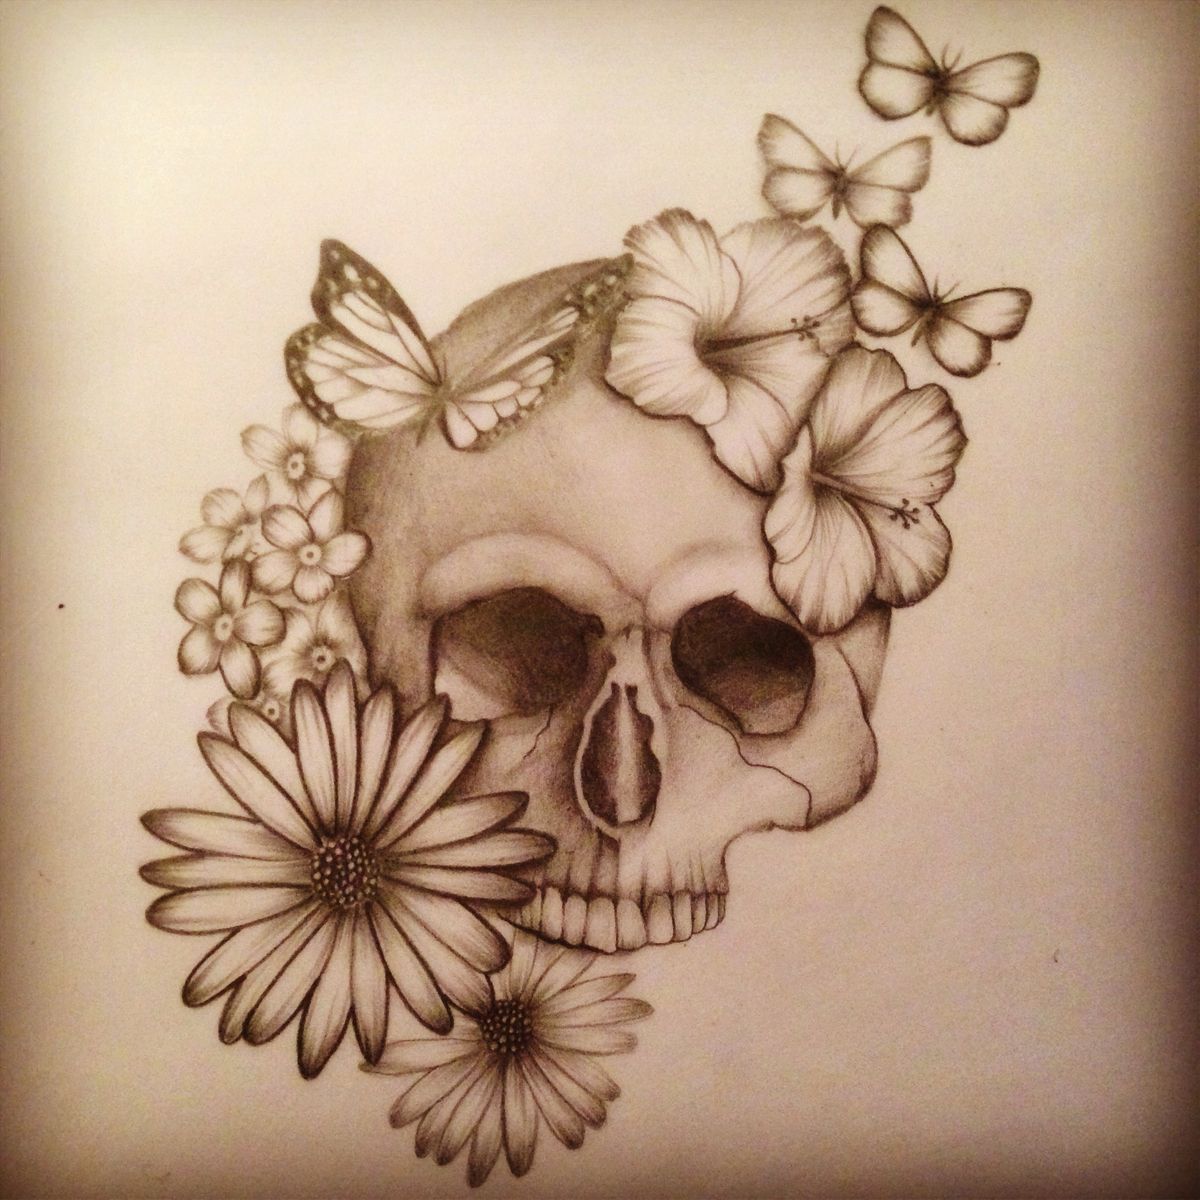 Flowers And Butterflies With Skull Tattoo Design